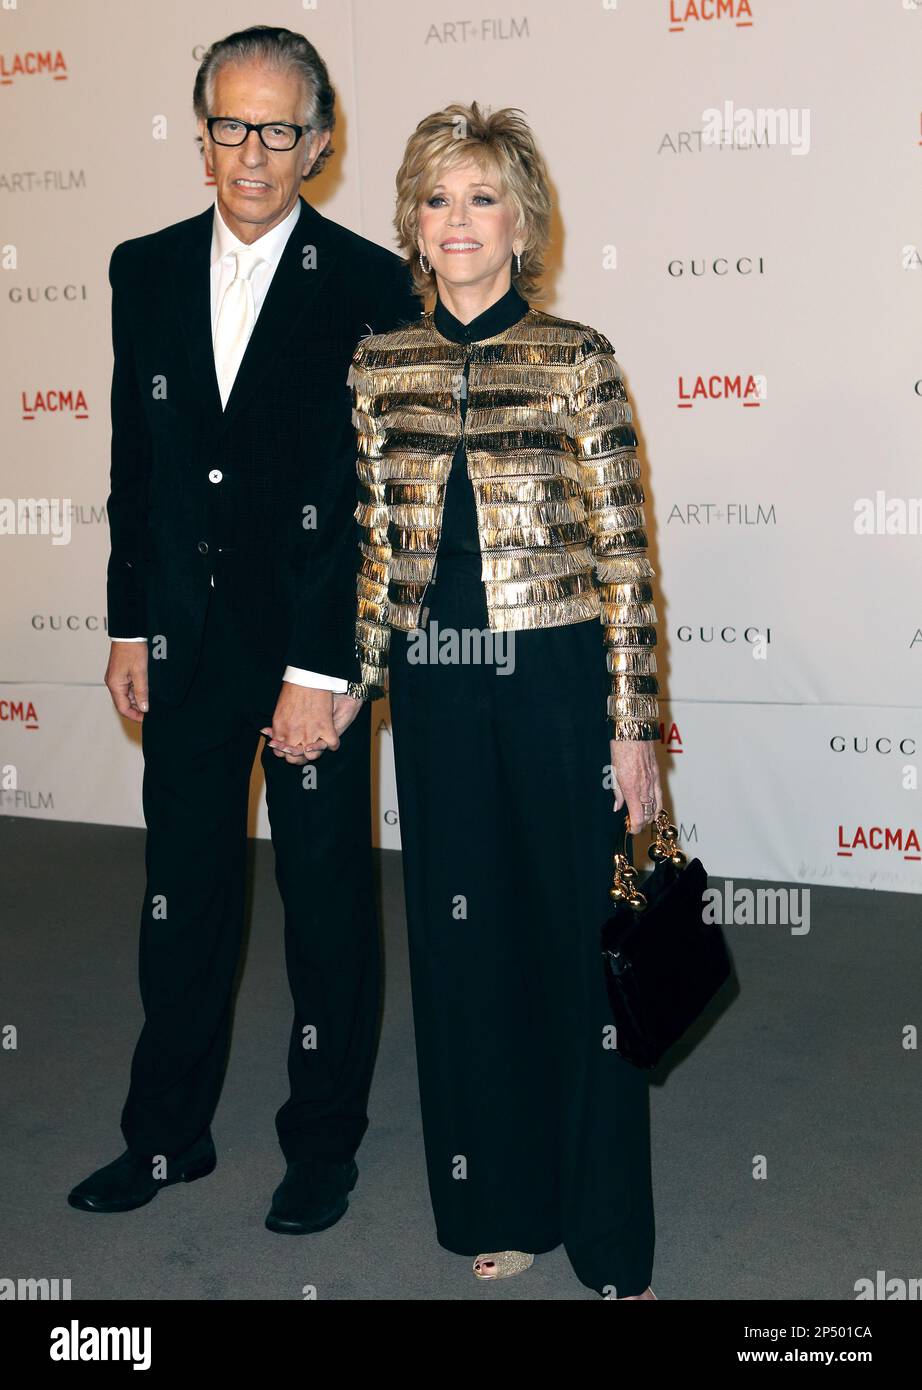 Richard Perry and Jane Fonda attend LACMA Art + Film Gala Honoring Clint  Eastwood and John Baldessari Presented By Gucci at Los Angeles County  Museum of Art on November 5, 2011 in